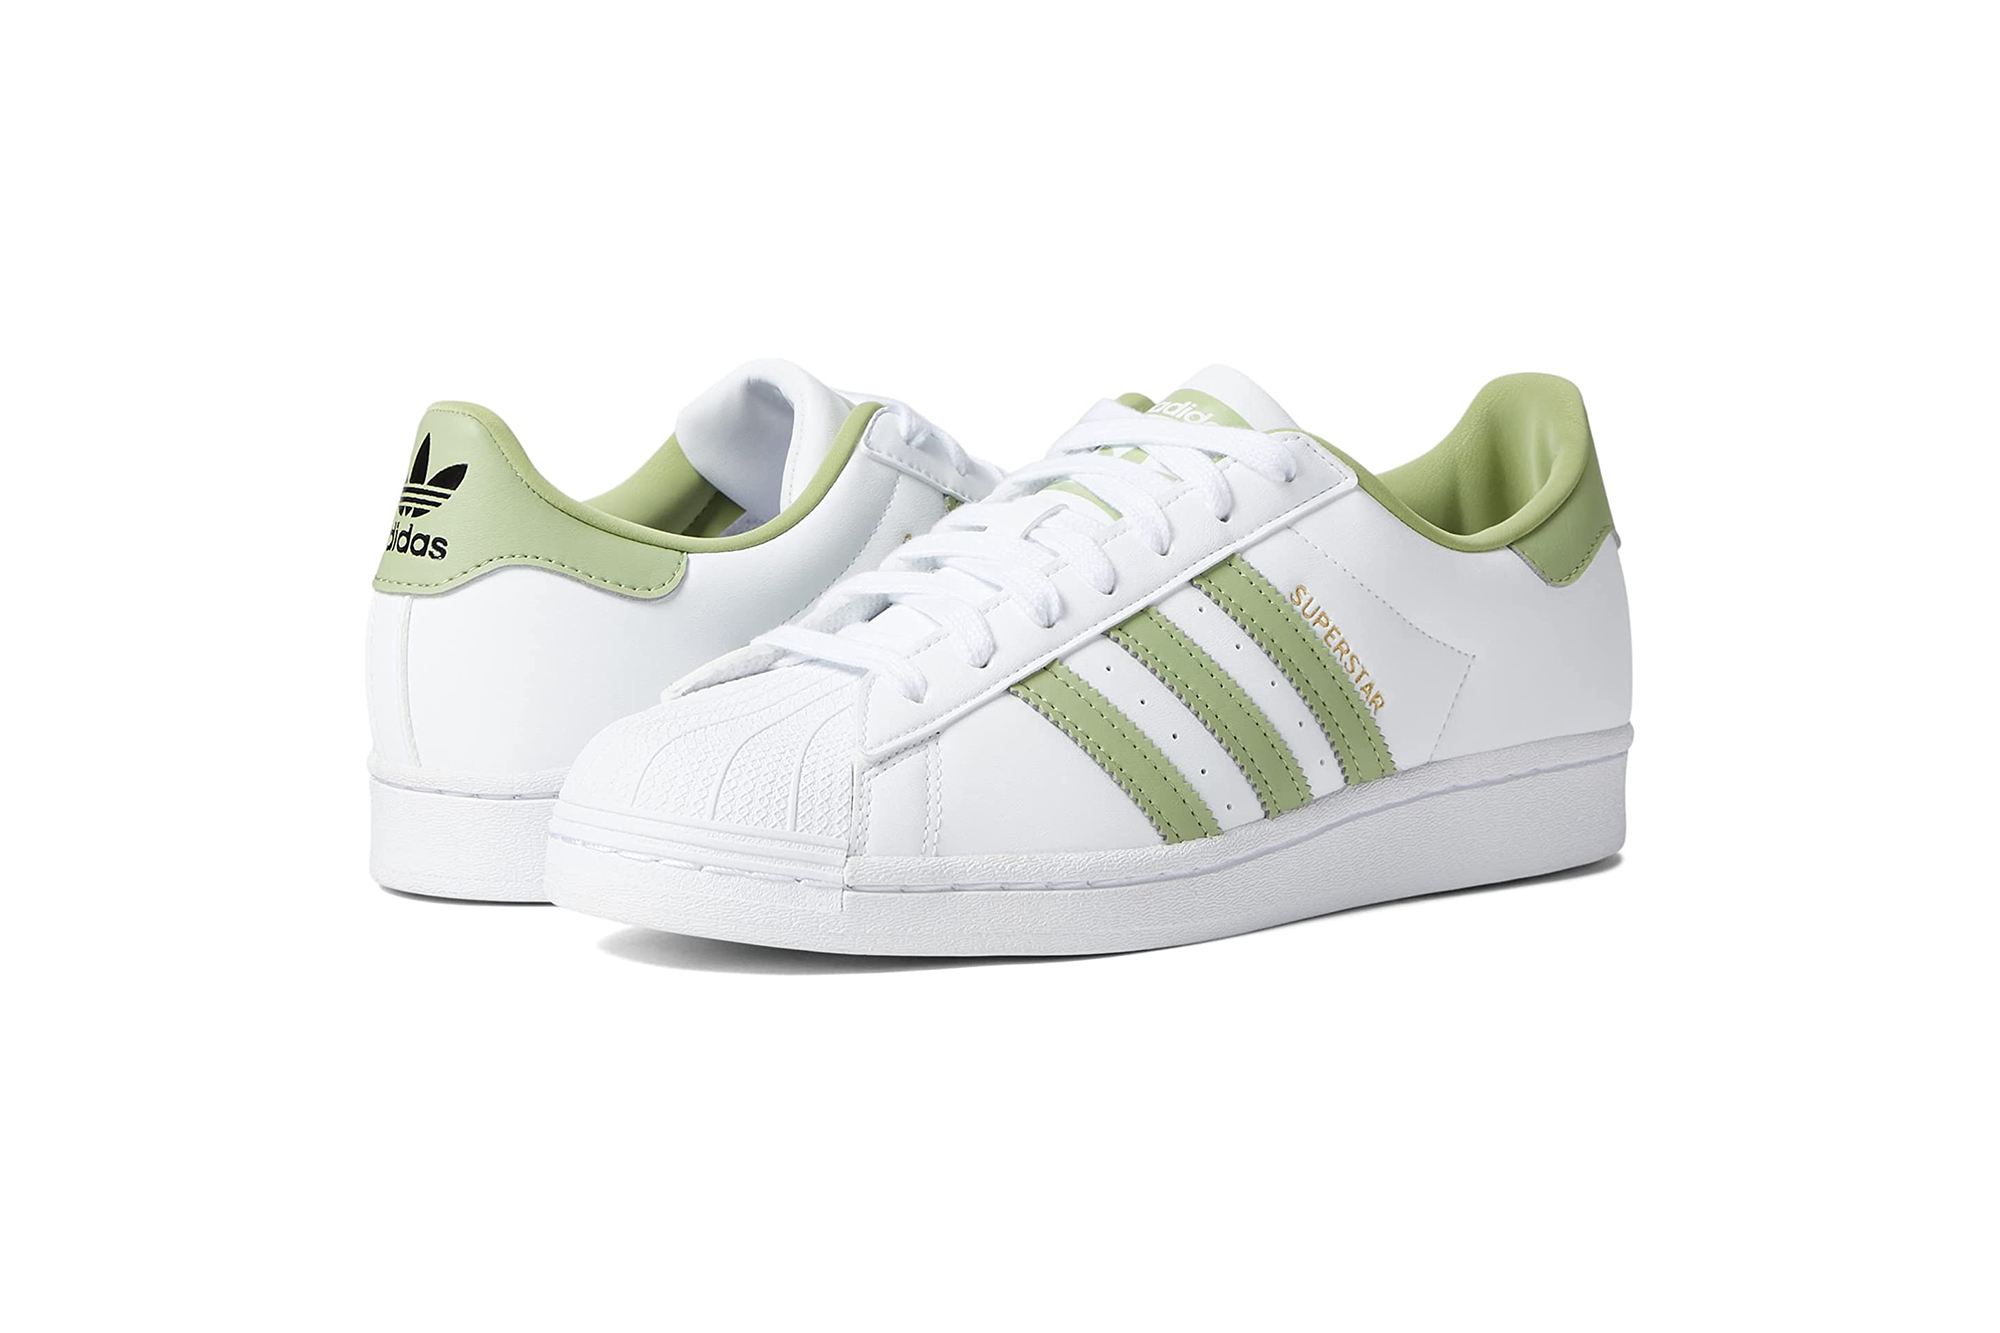 erwt tempel Vouwen Adidas Classic Sneakers Have a Pop of Color That's Ideal for Spring